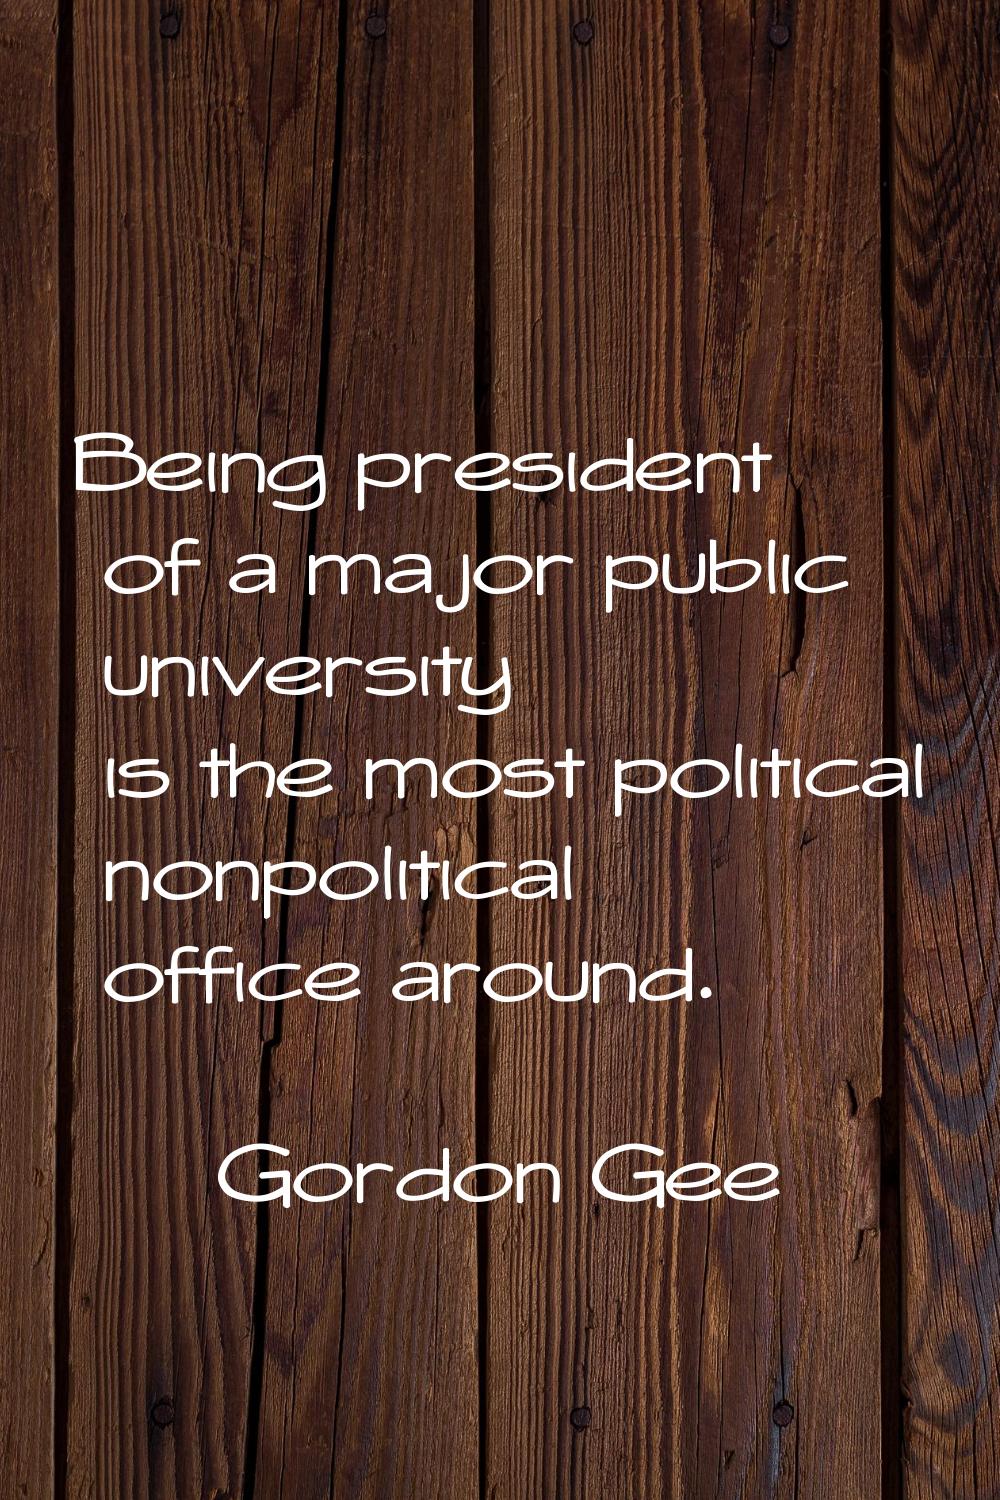 Being president of a major public university is the most political nonpolitical office around.